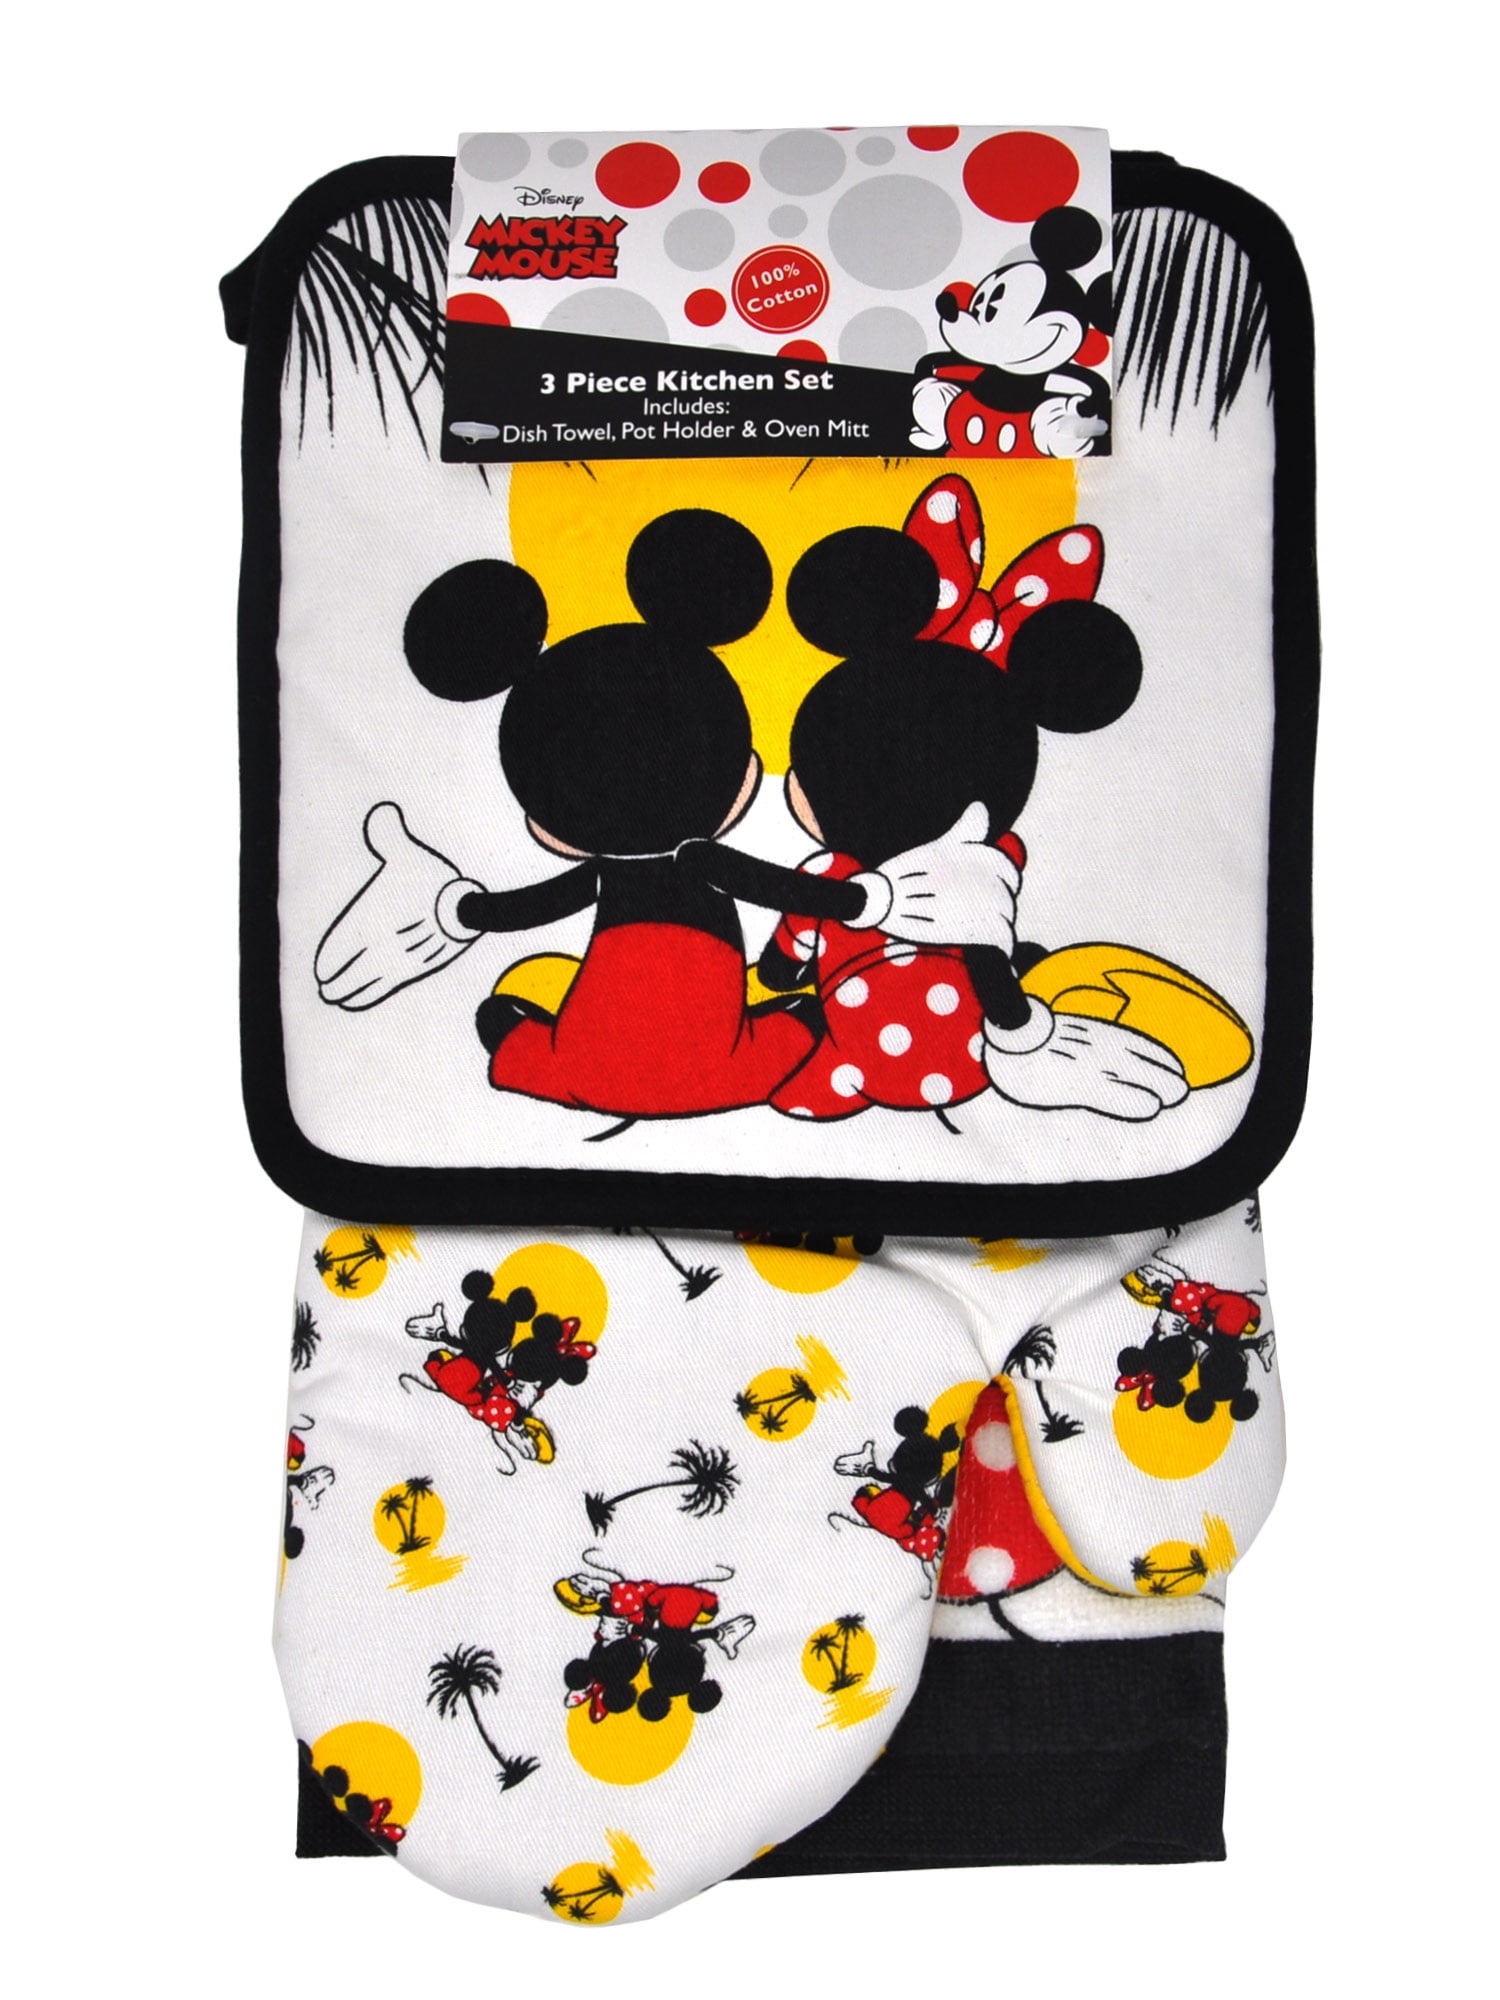 New Disney Mickey Kitchen Placemat Oven Mitt Pot Holders By Home Collection Set 